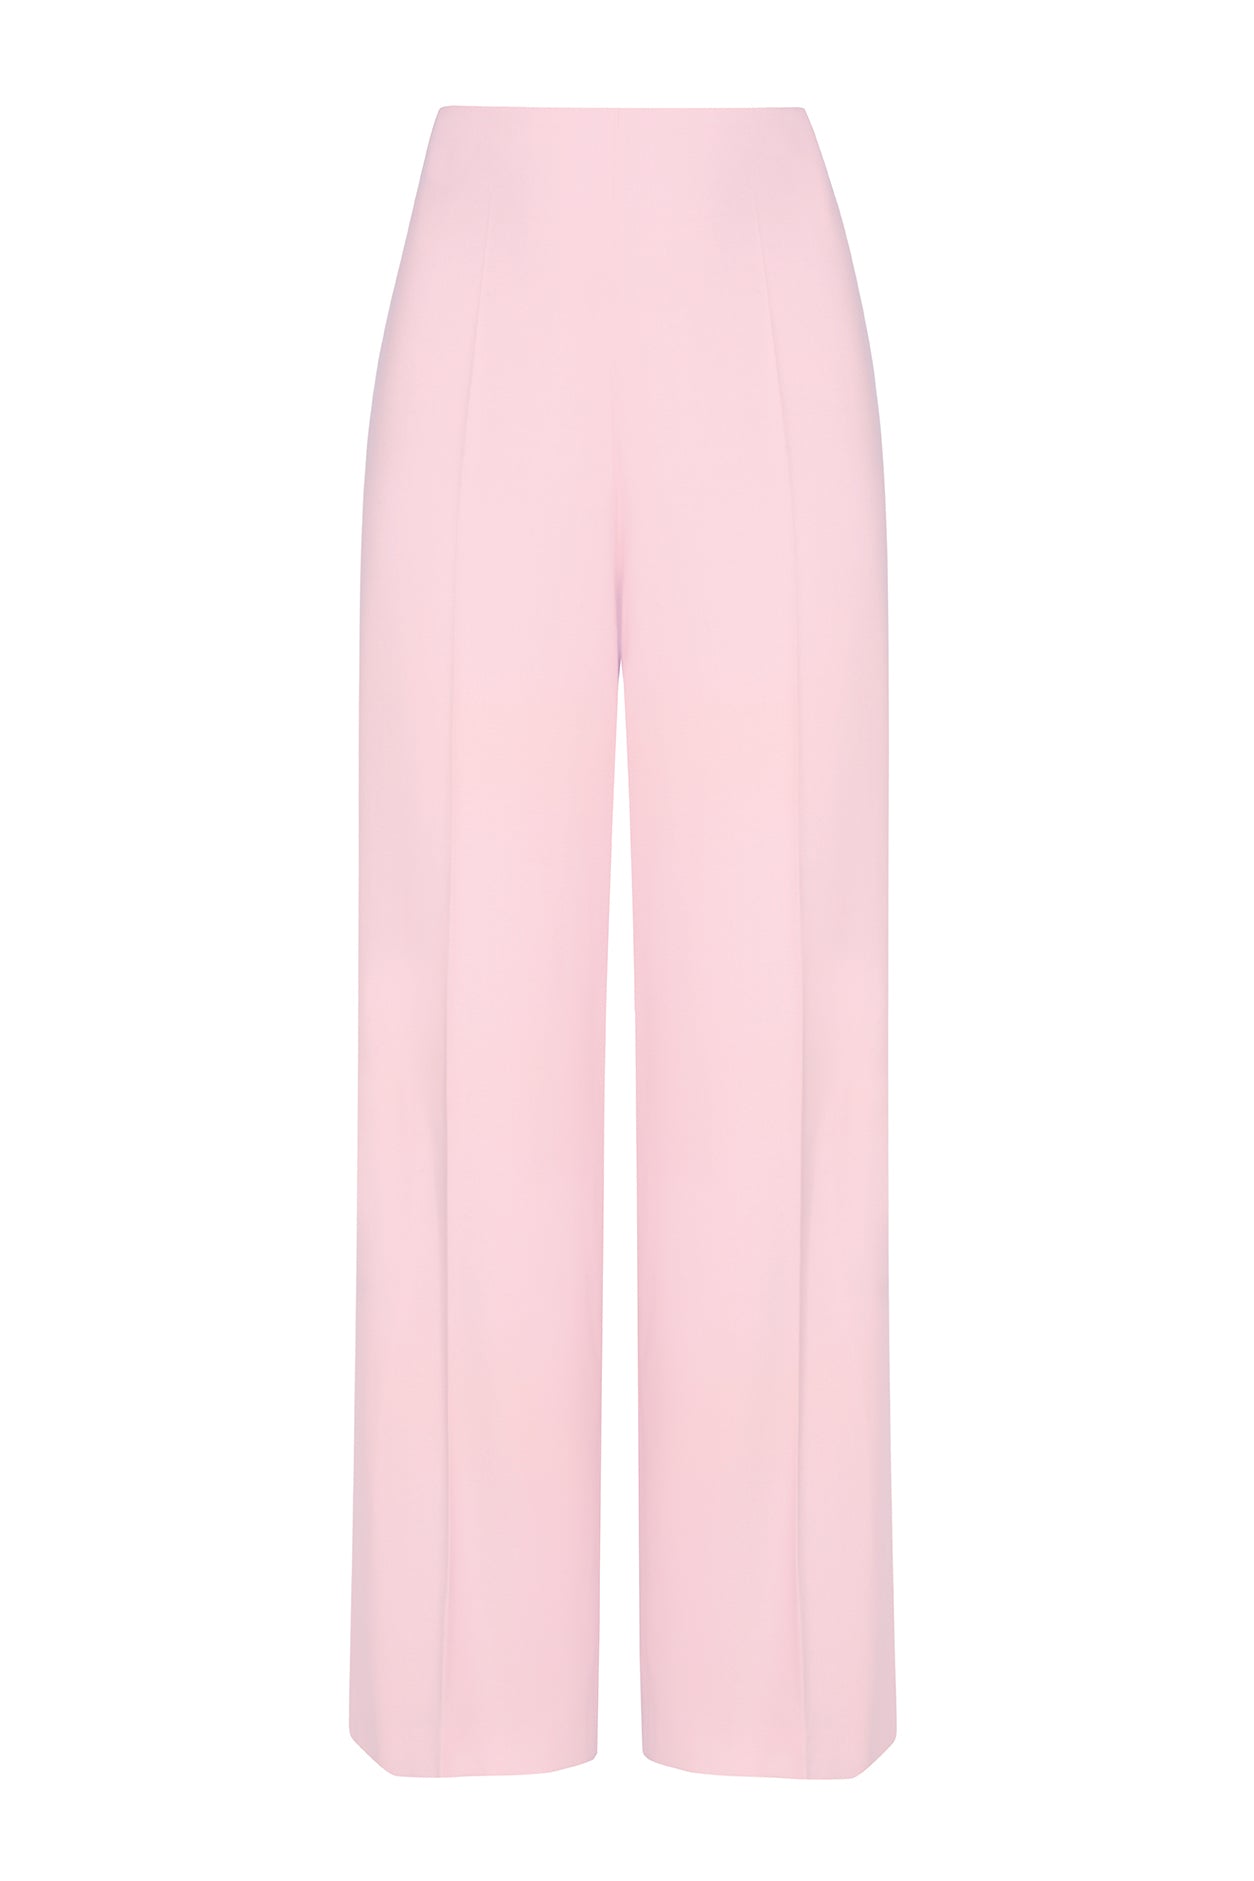 Wide Leg Trousers in Plain Pink Wool Faille - Paloma